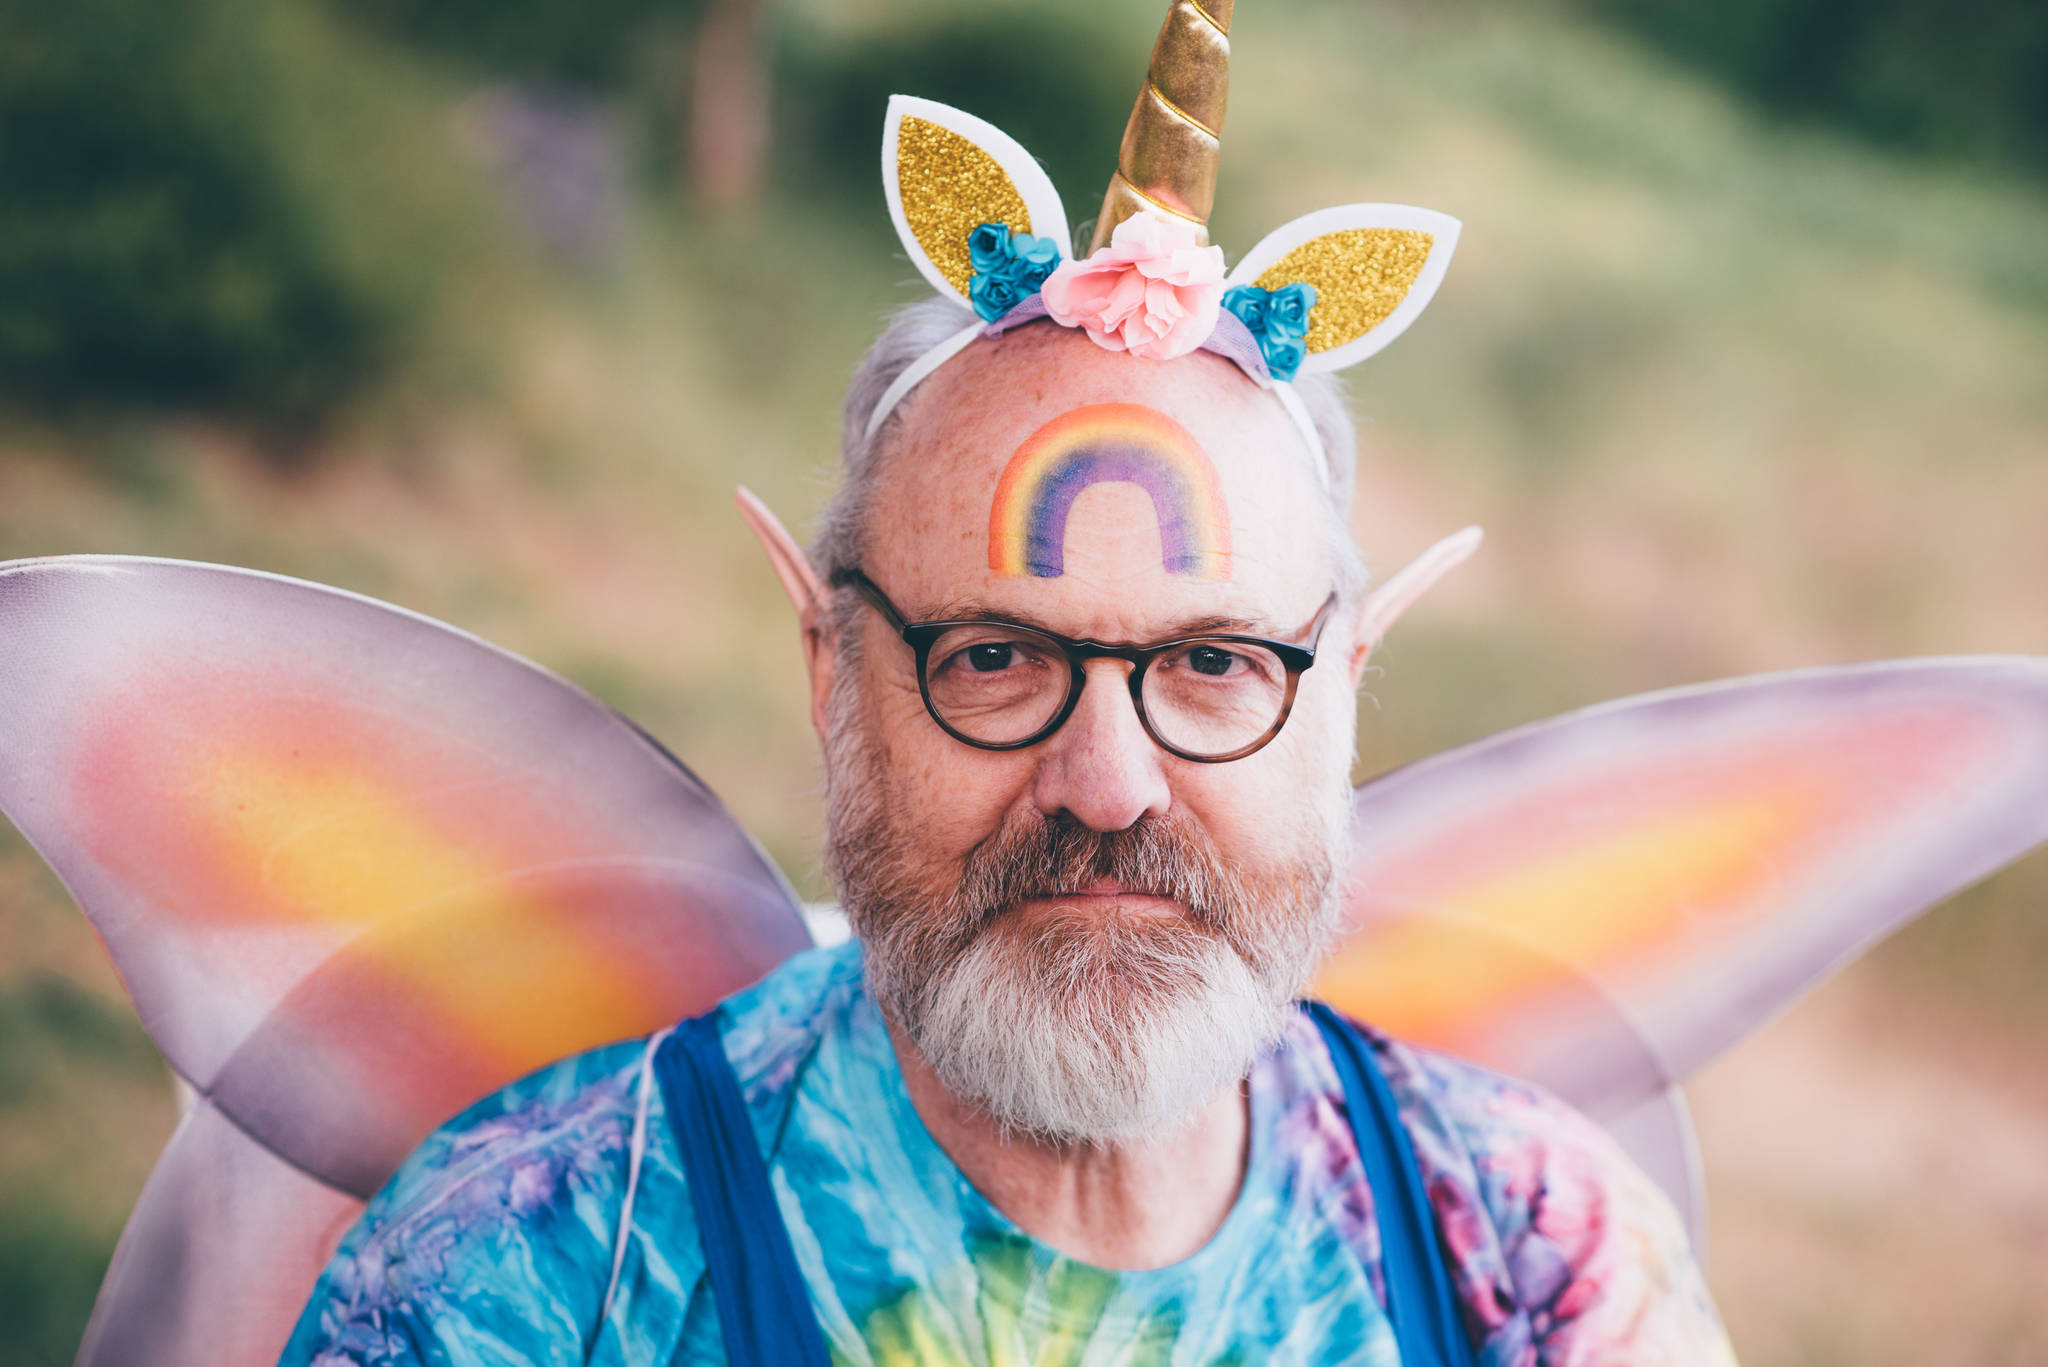 Sometimes being a dad means dressing up as a unicorn | Father’s Day profile